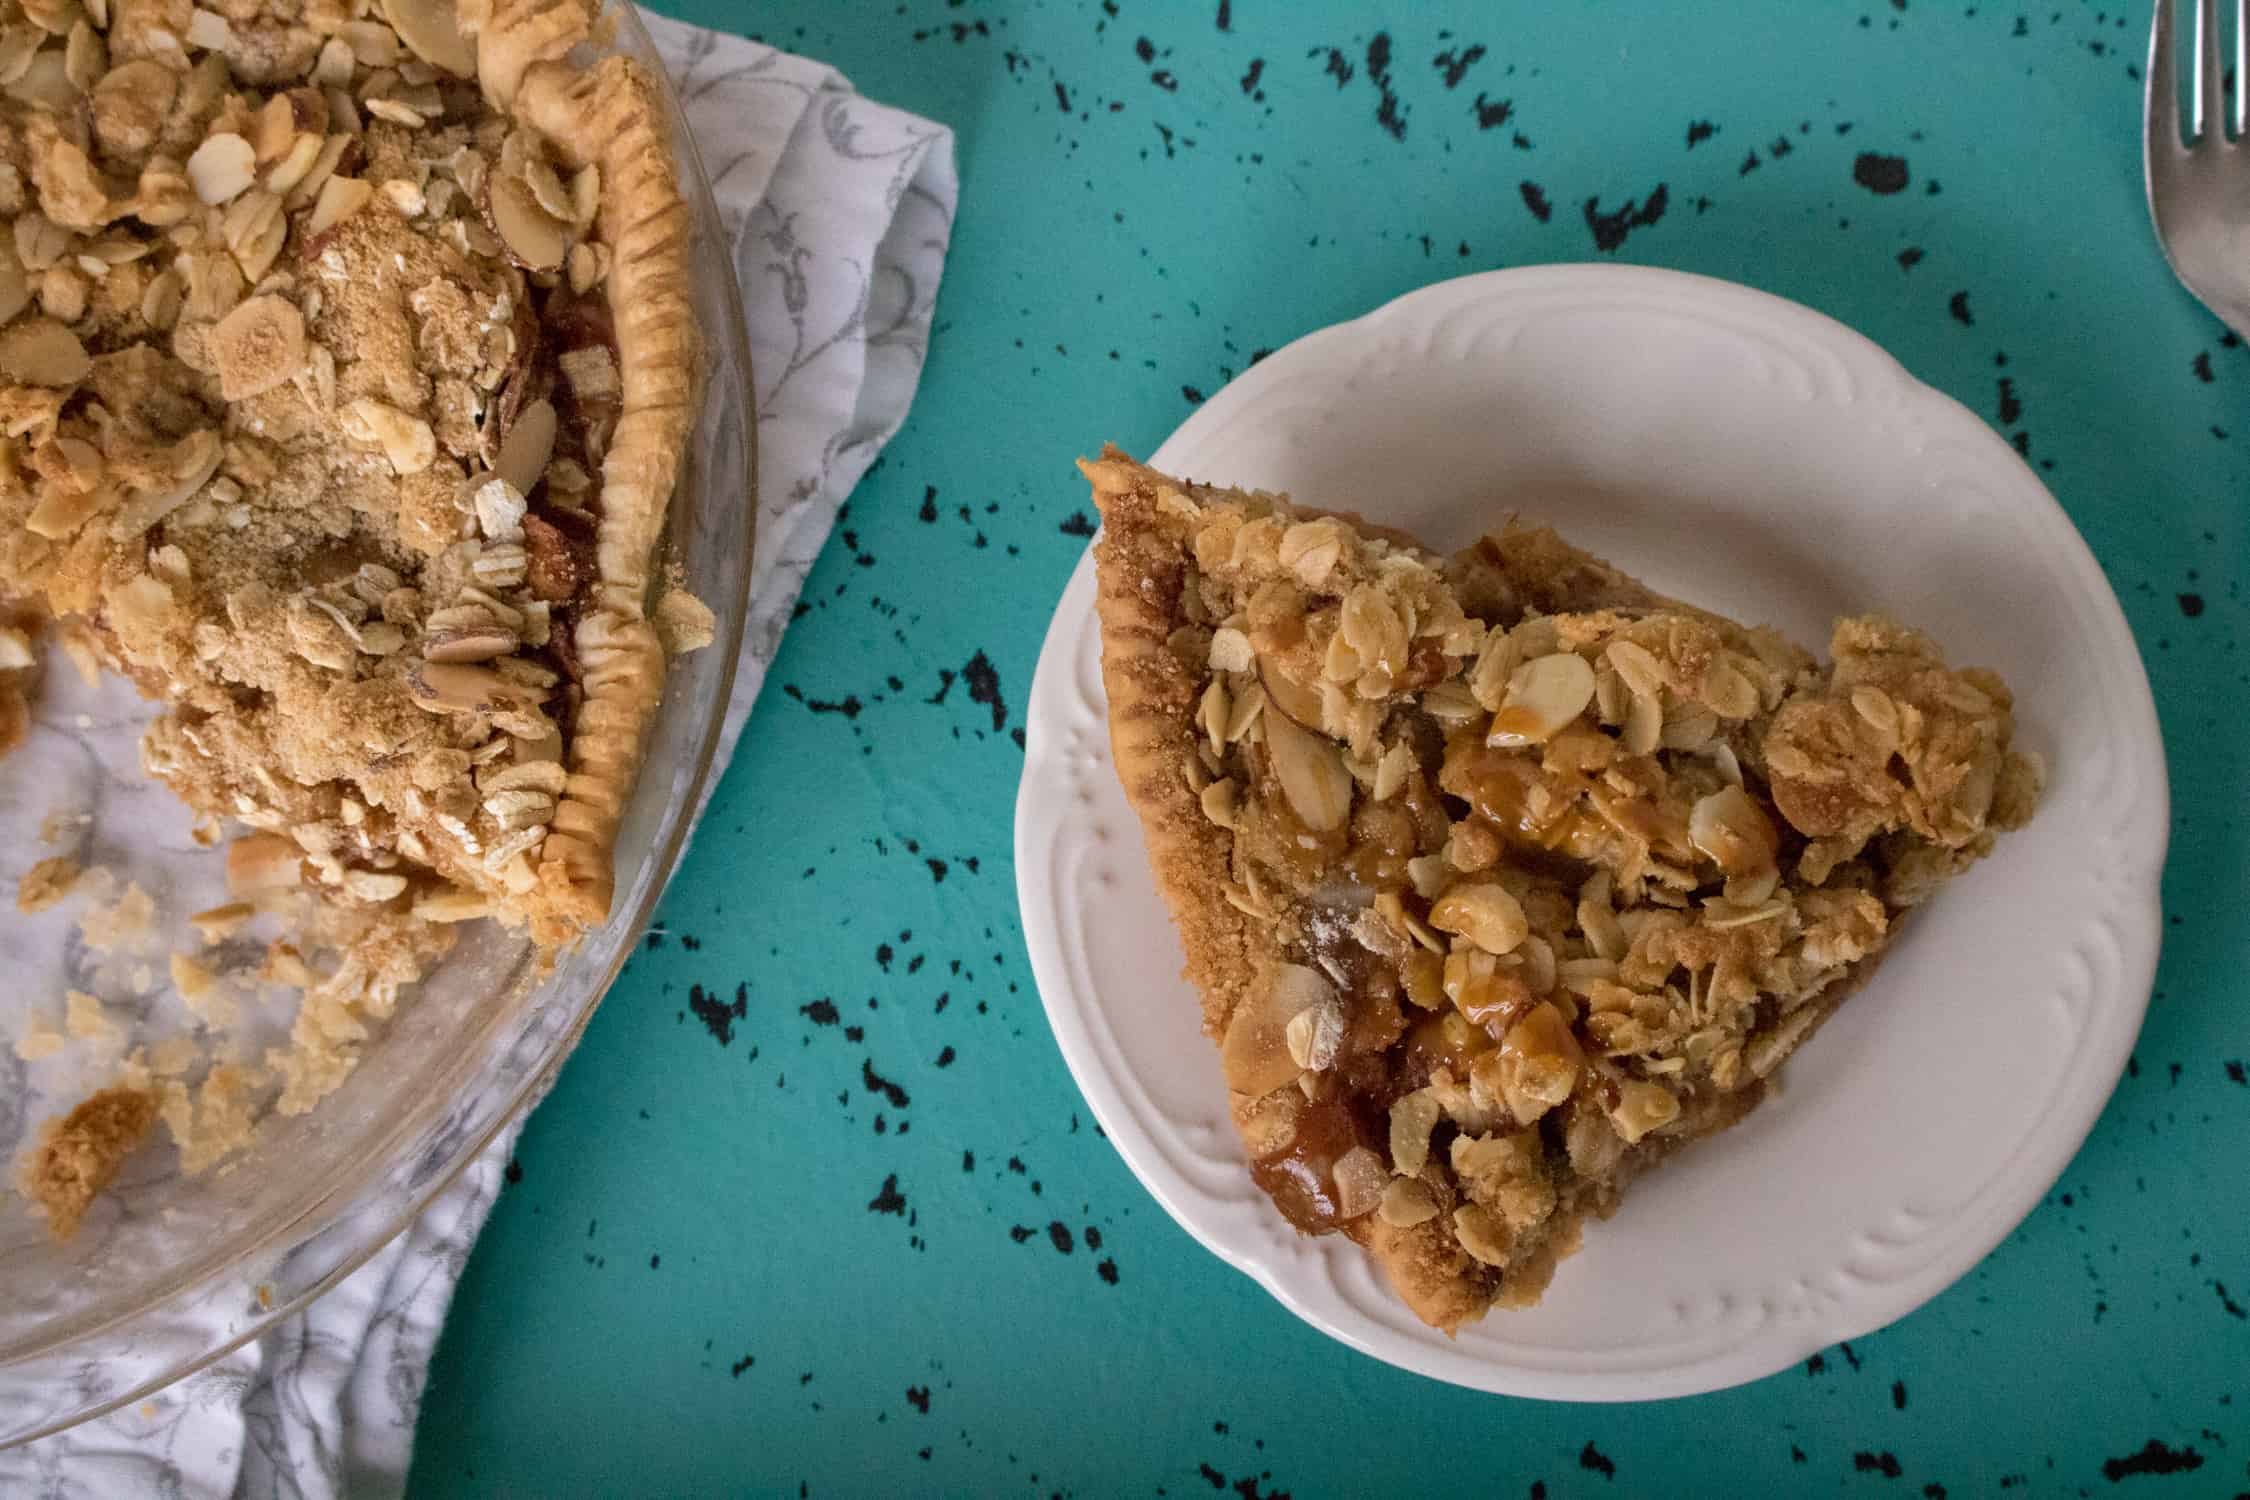 One slice of Caramel Apple Crumble Pie on a white plate with baked pie to the left. Both are sitting on a blue and black placemat